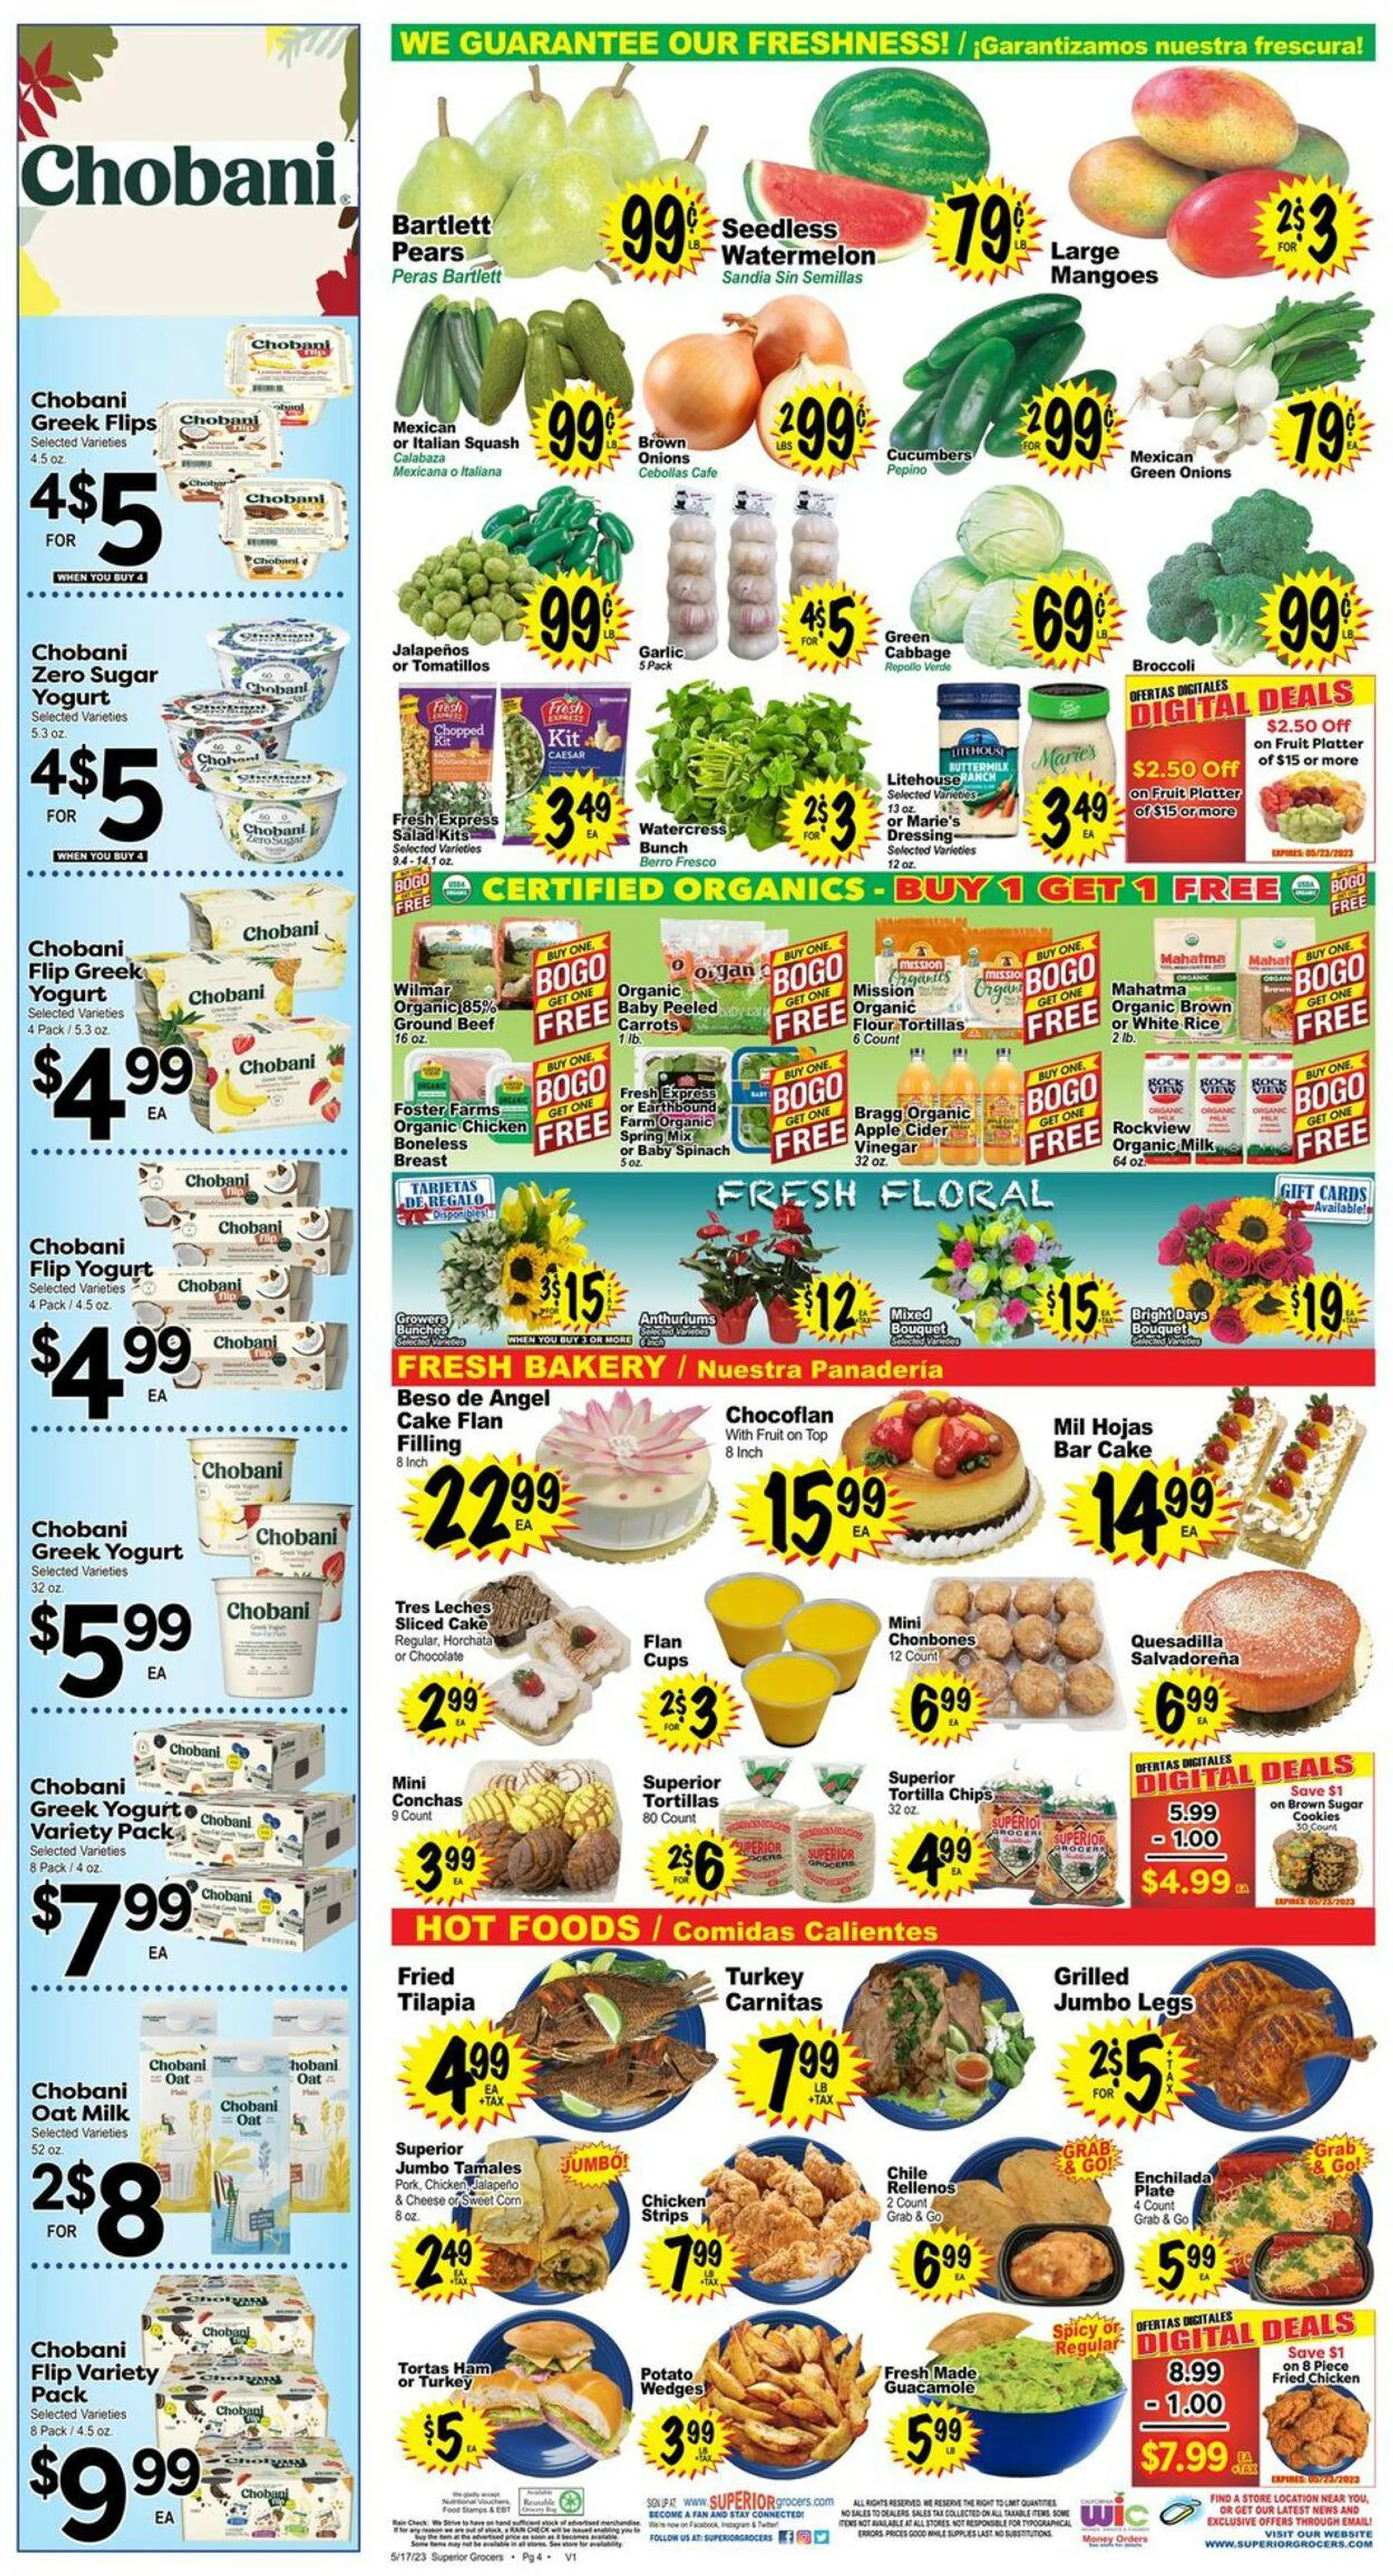 Superior Grocers Current weekly ad - 4